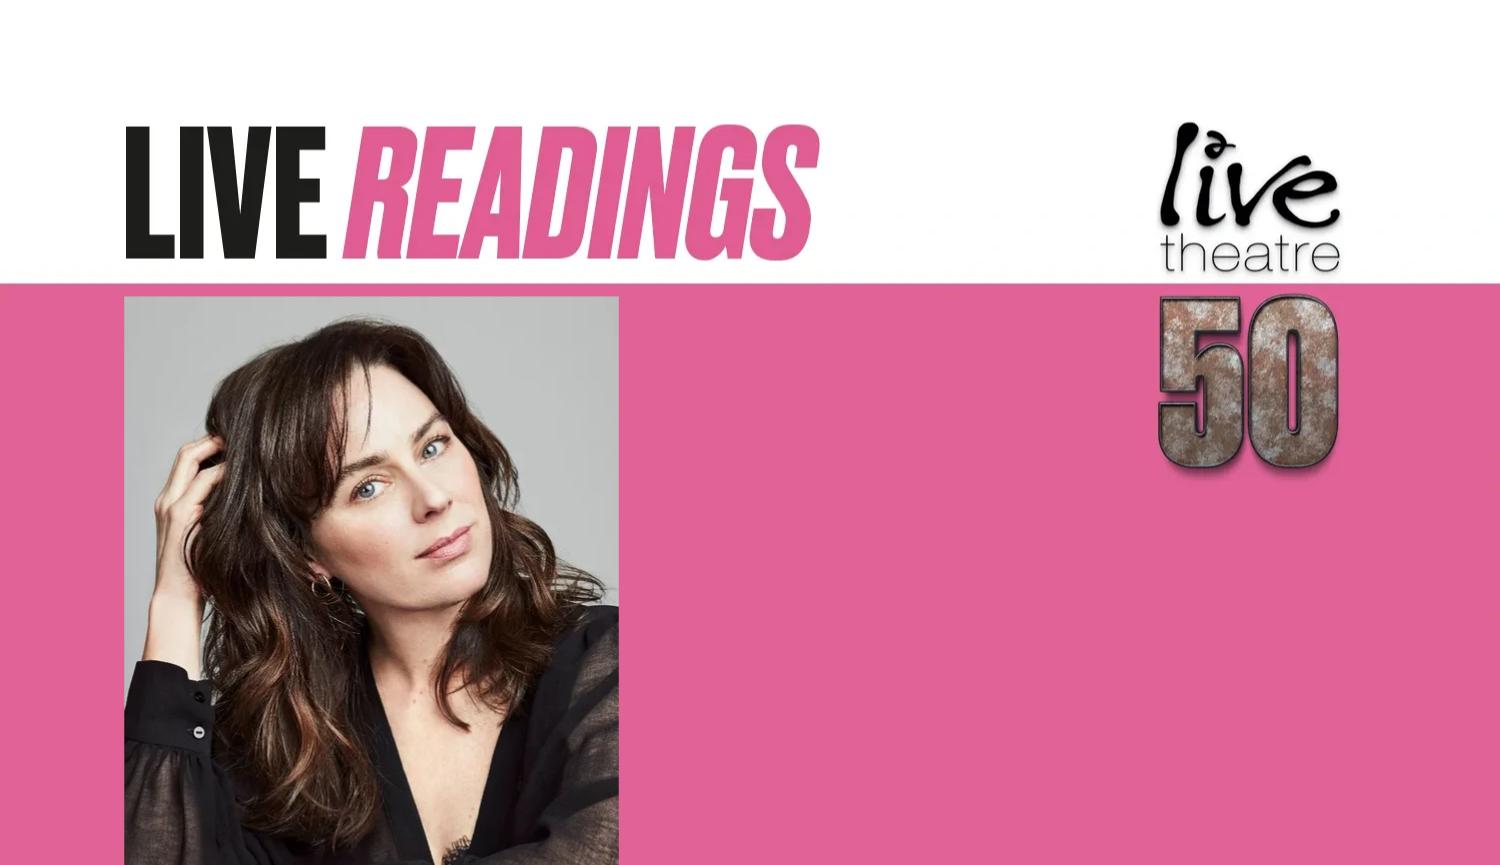 Live Readings and Live Theatre 50 logo and Jill Halfpenny photograph